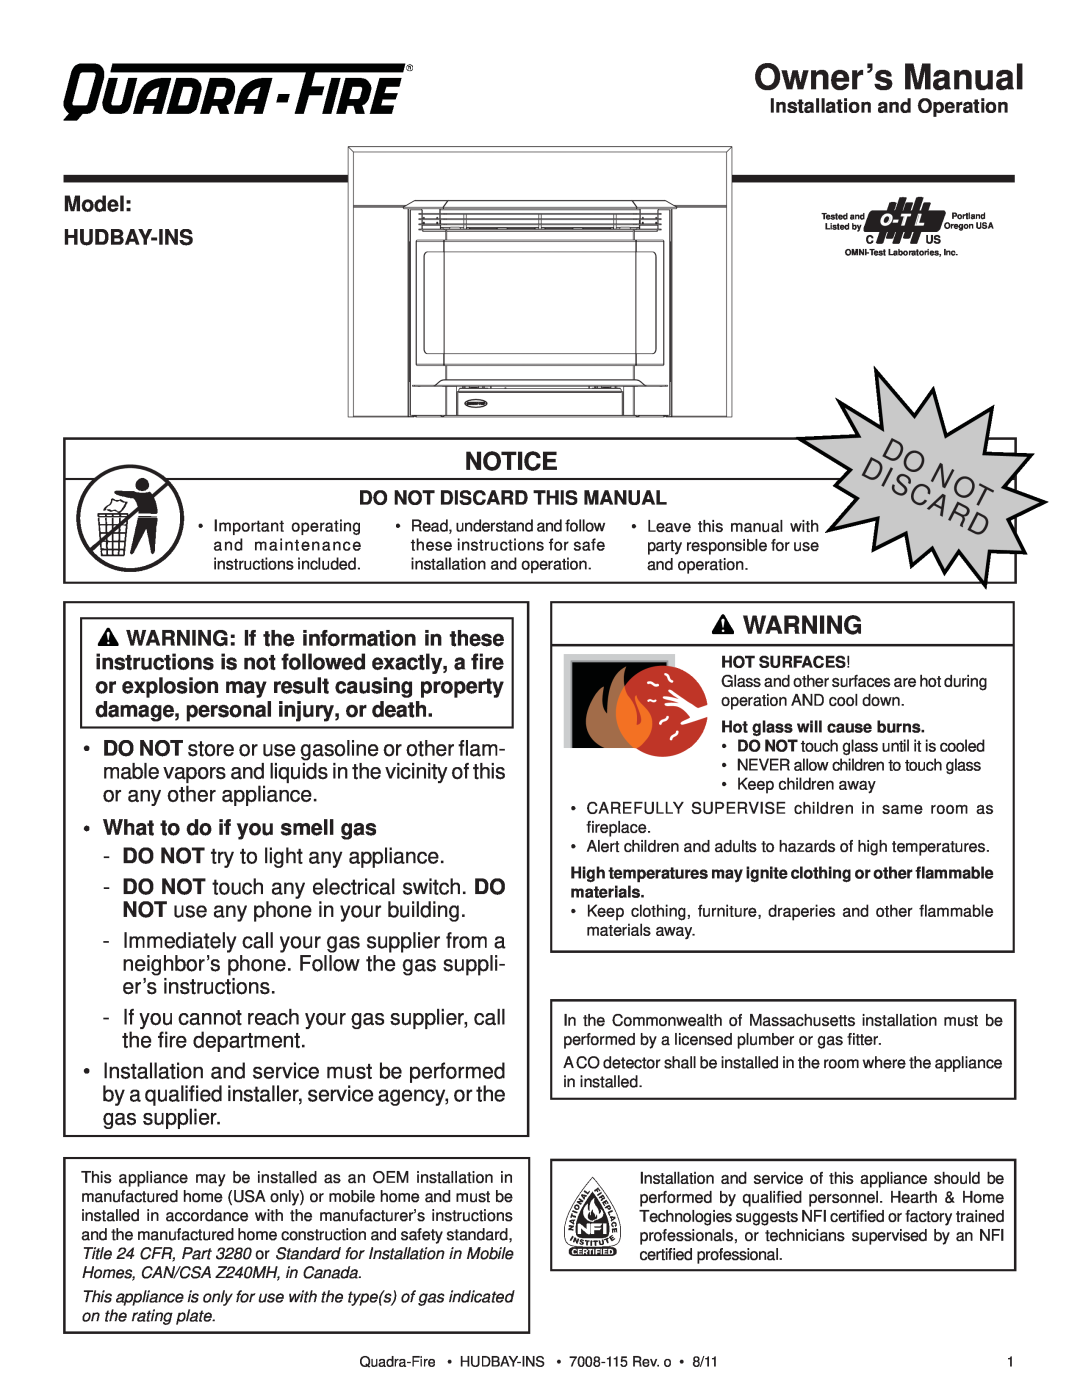 Quadra-Fire 7008-115 owner manual Model, Hudbay-Ins, What to do if you smell gas, Discard 